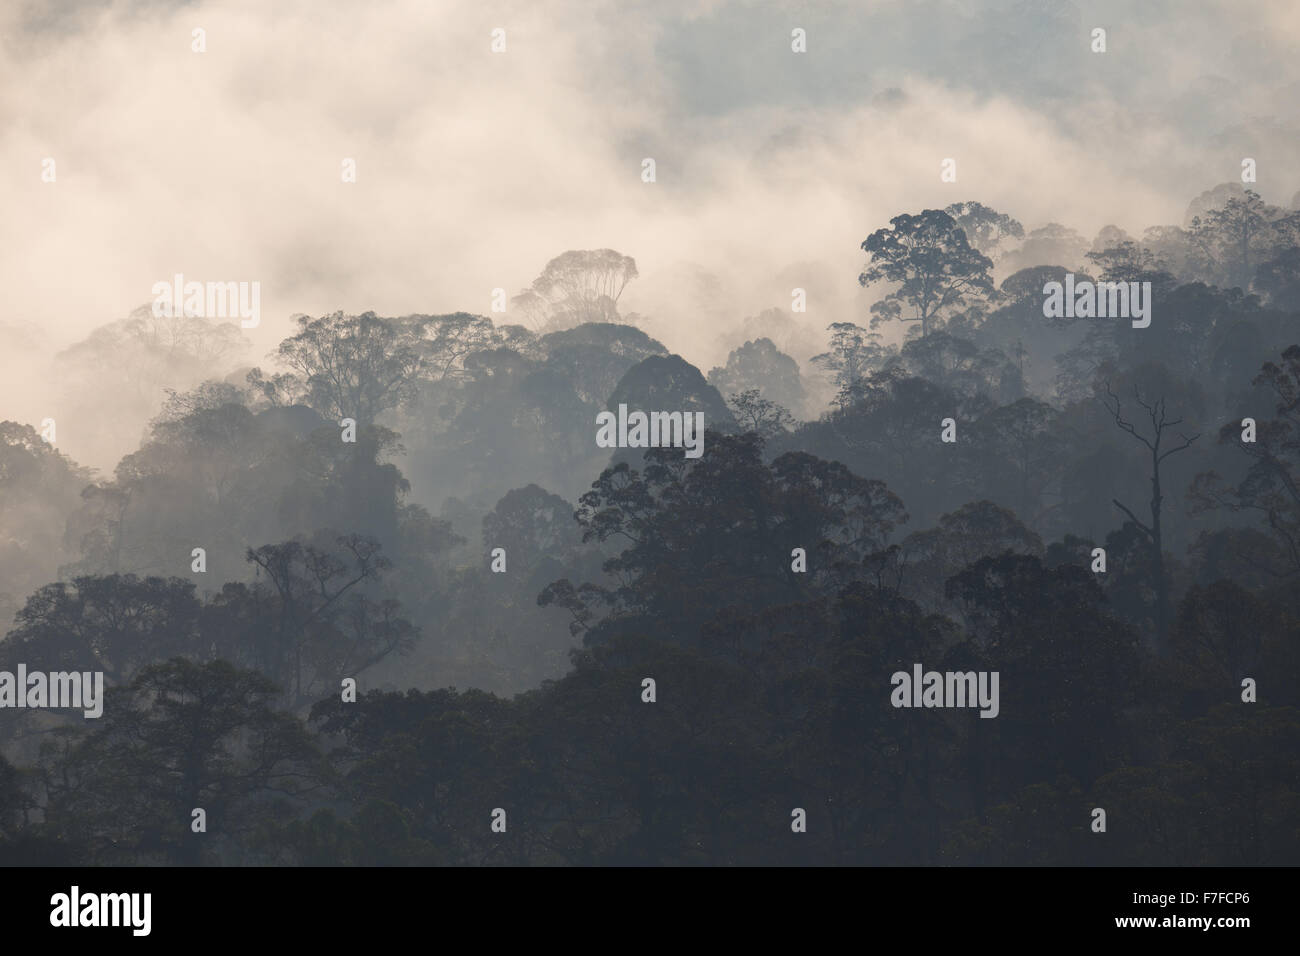 Early Morning mist sorge nella foresta pluviale tropicale, Danum Valley, Sabah, Malaysia Foto Stock